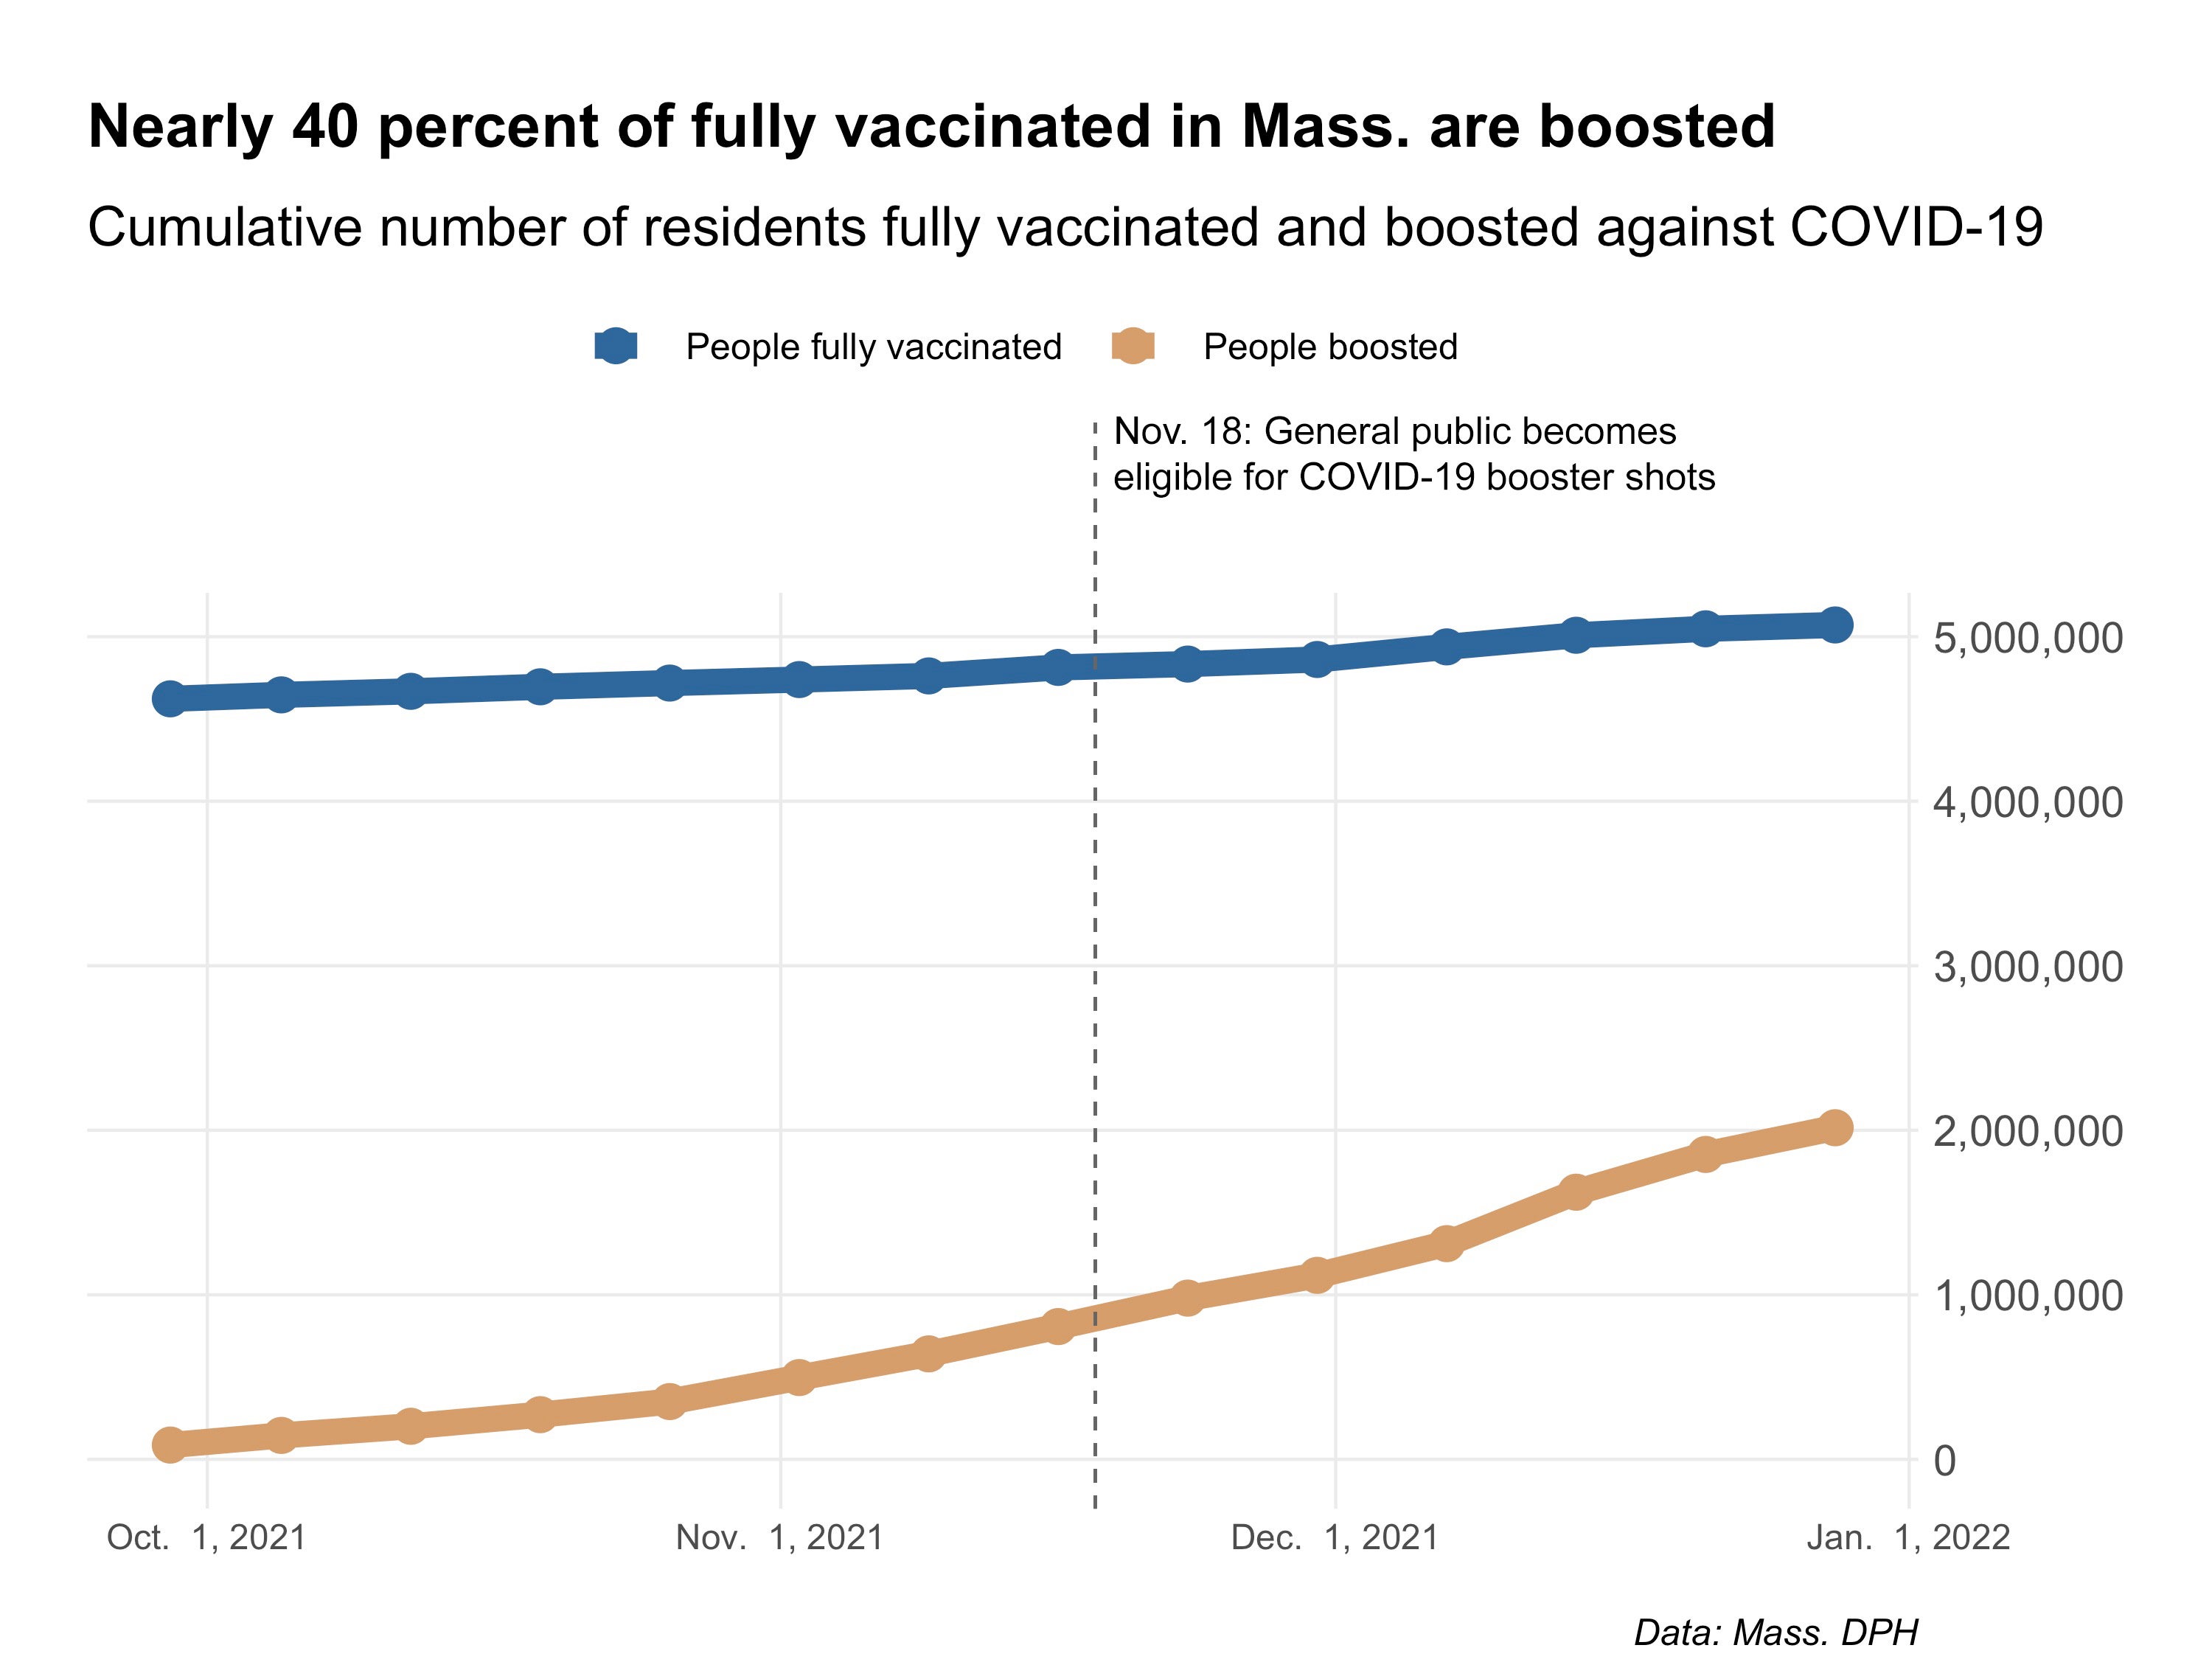 Less than half of vaccinated Mass. residents have received a booster ...